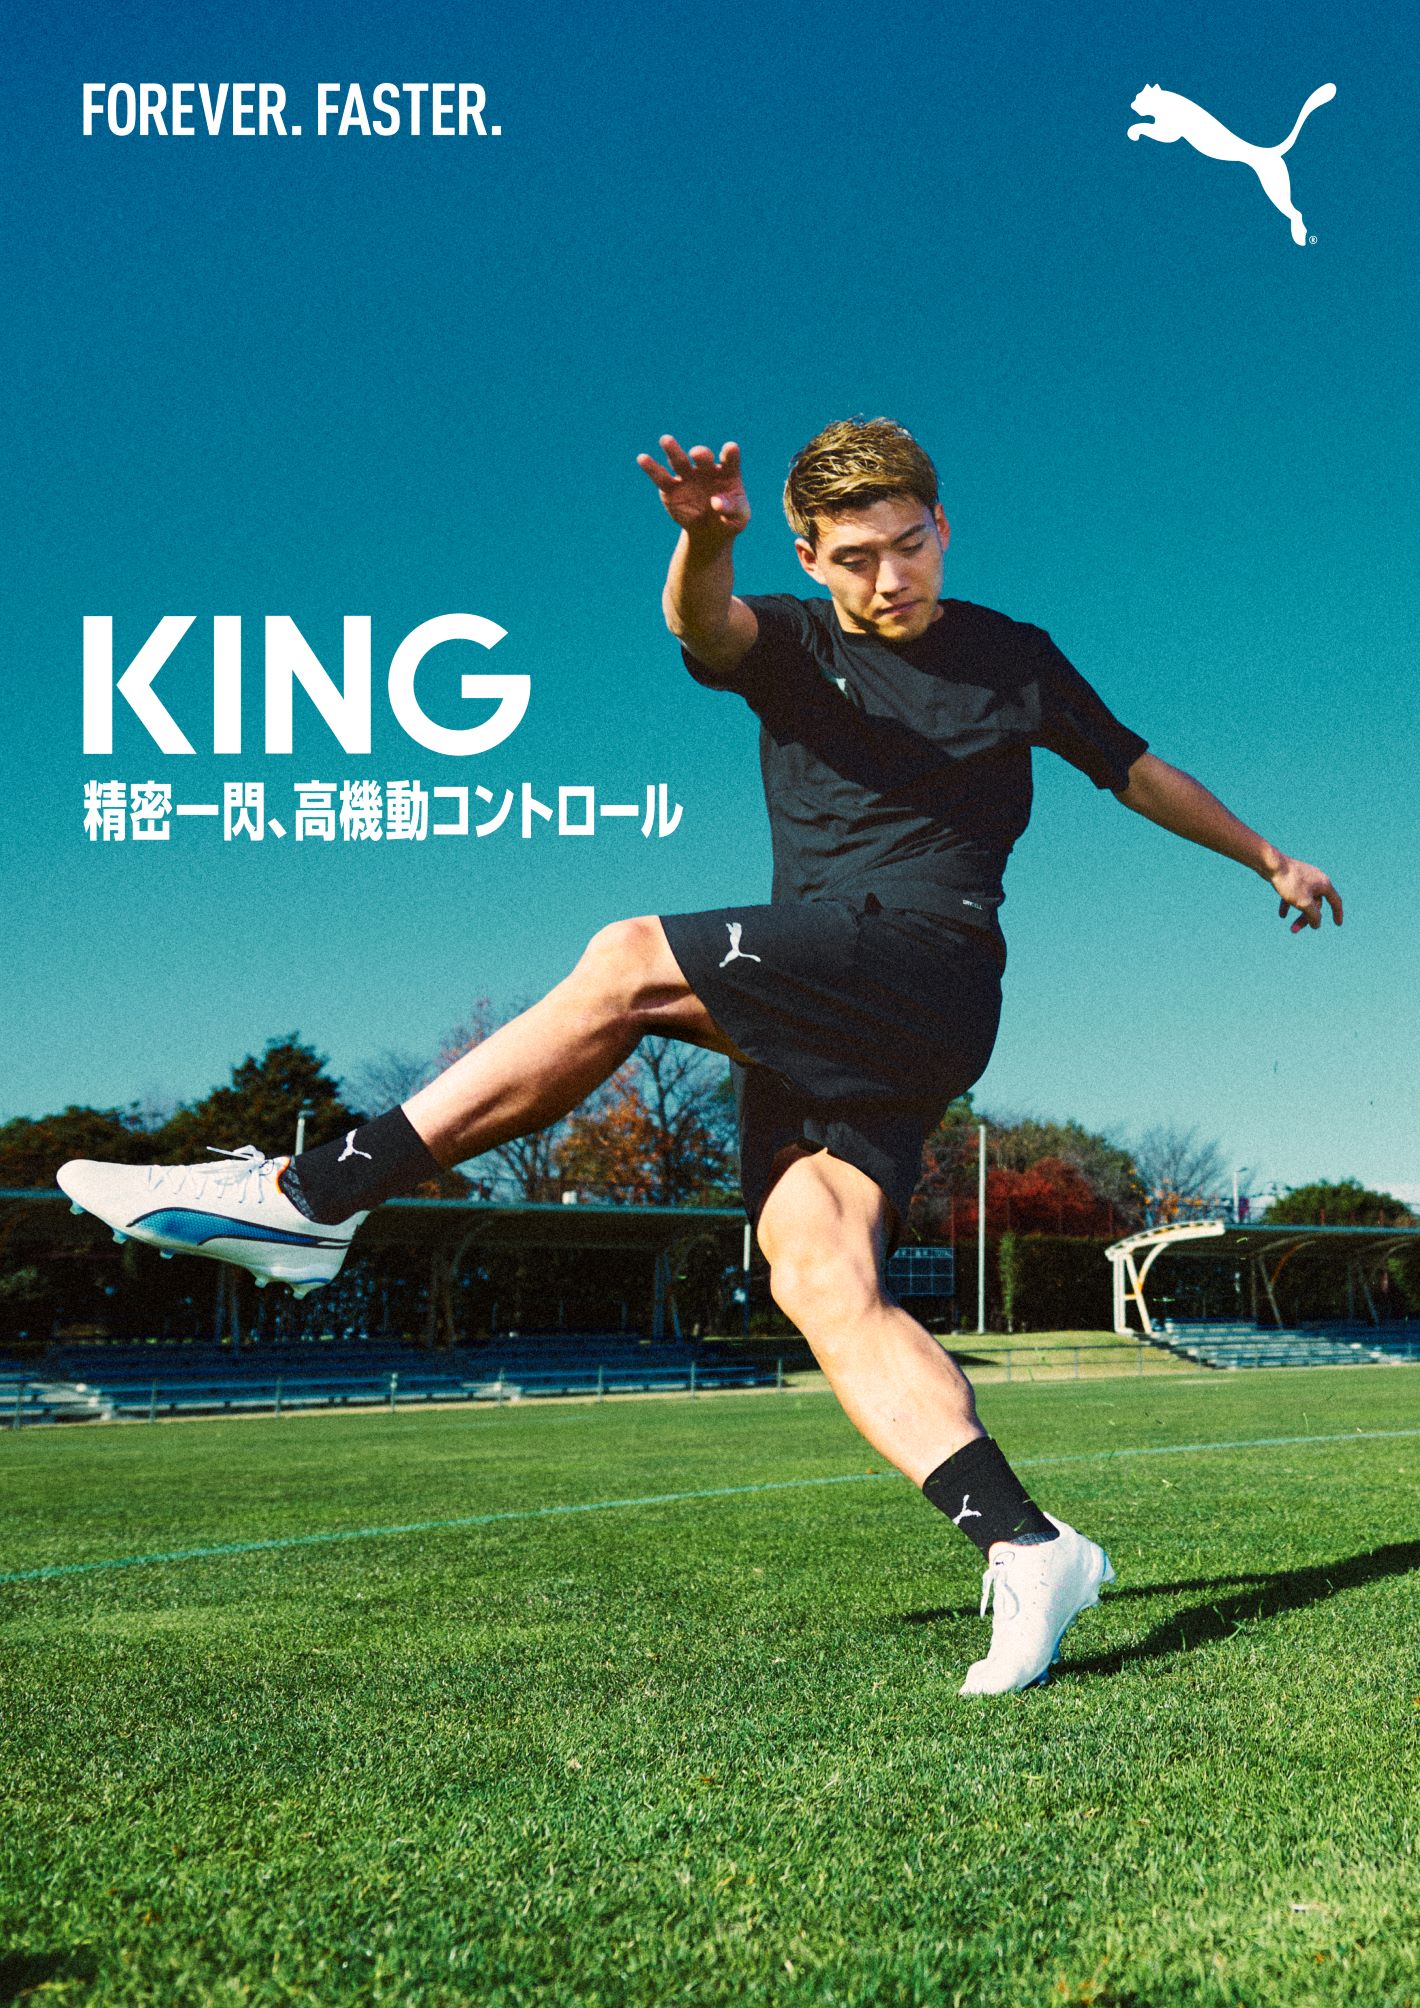 PUMA サッカースパイク WEISWEILER-KING種類サッカーシューズ